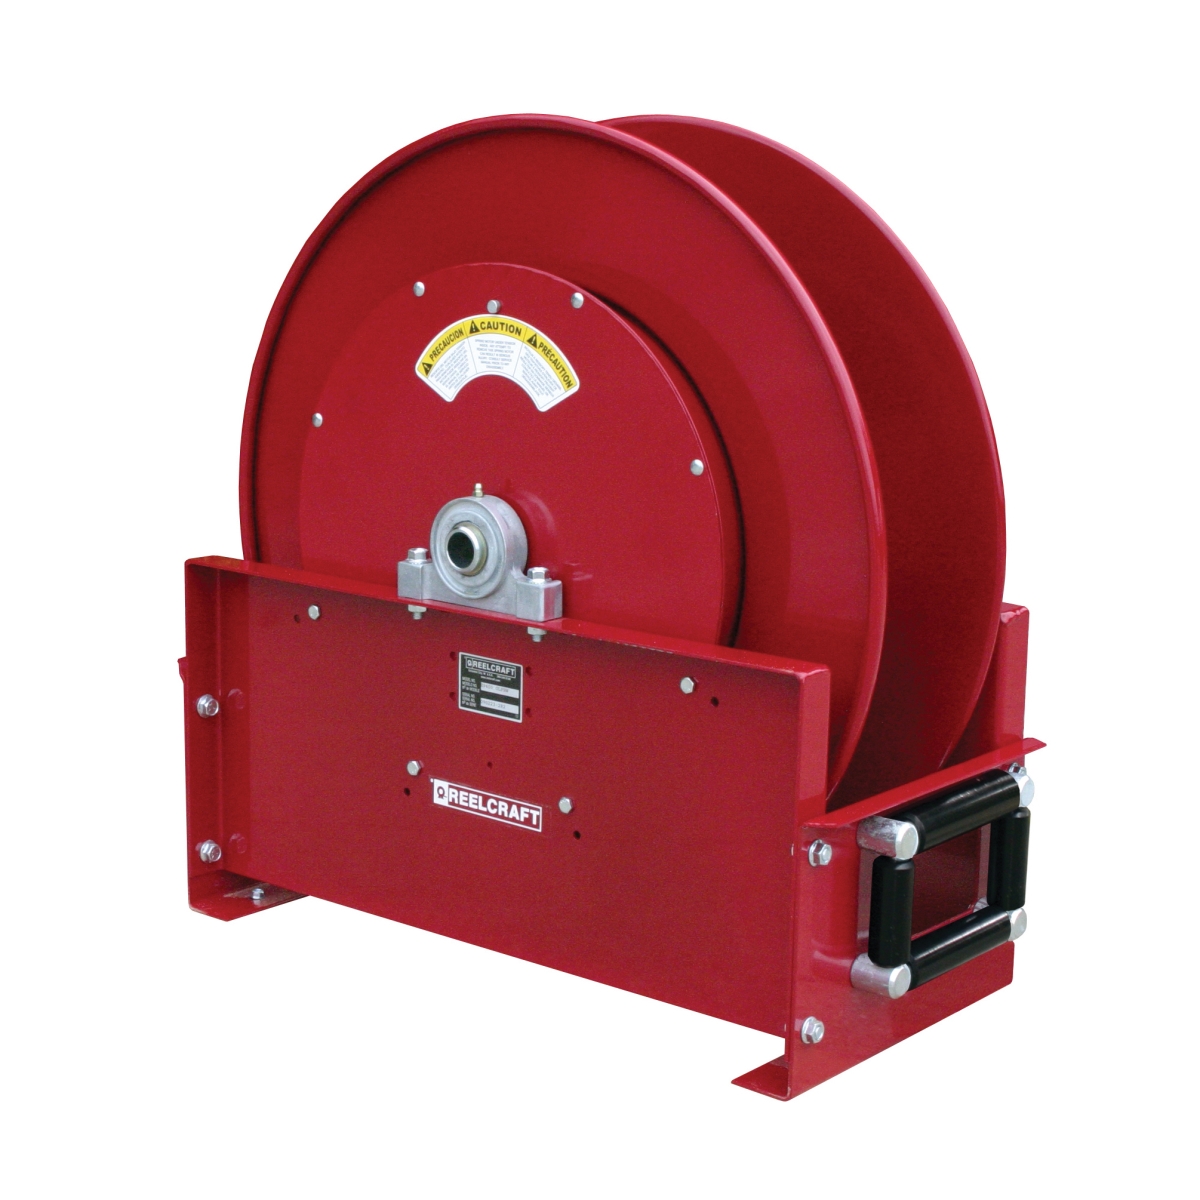 Fd9400 Olpbw 1 In. X 50 Ft. Ultimate Duty 500 Psi Fuel Without Hose Reel, Red